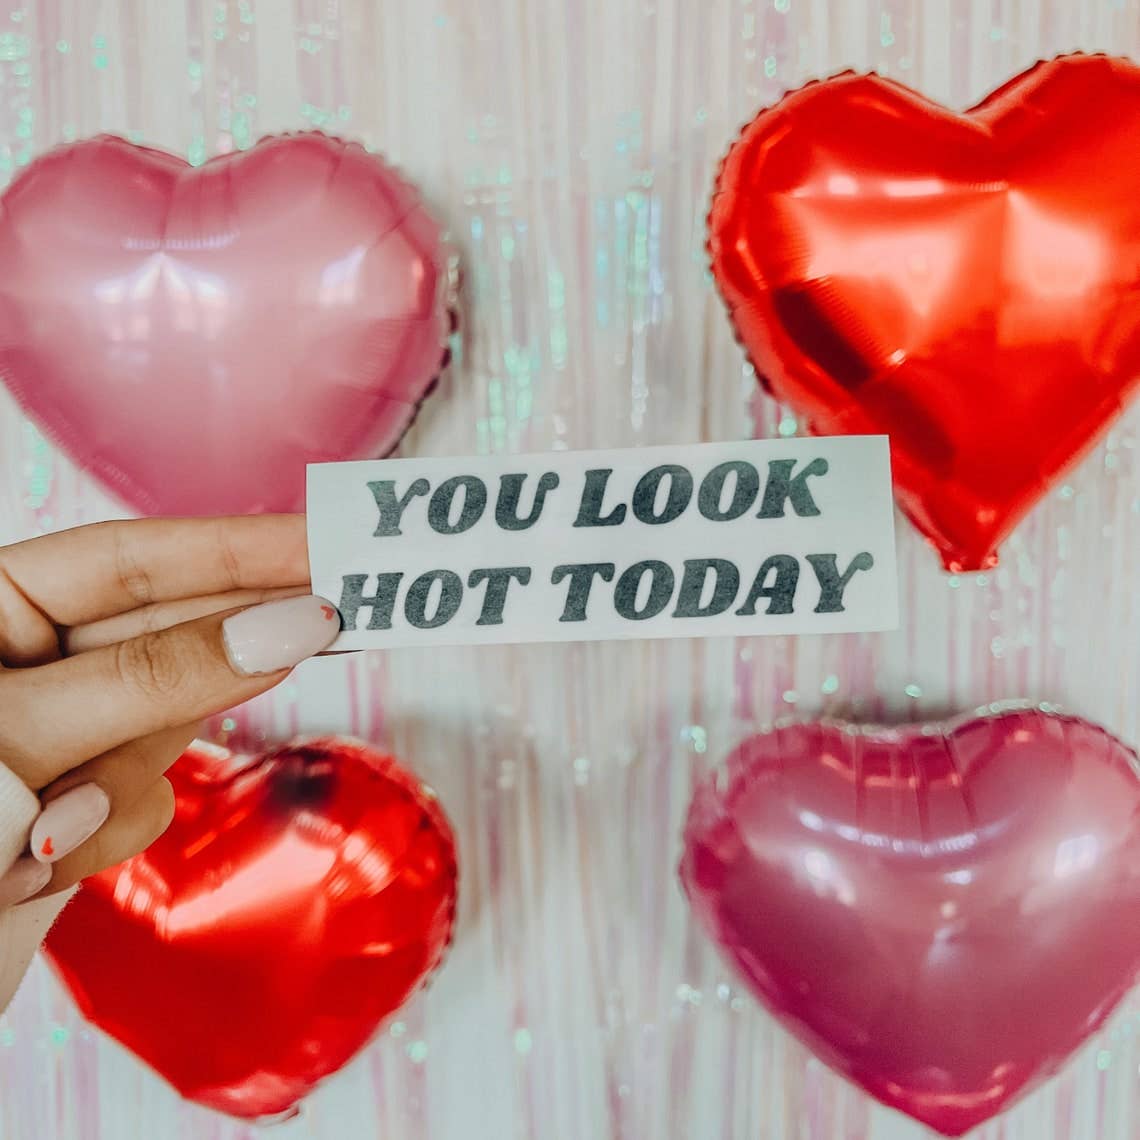 Jollie Ollie Designs - You Look Hot Today Mirror Decal